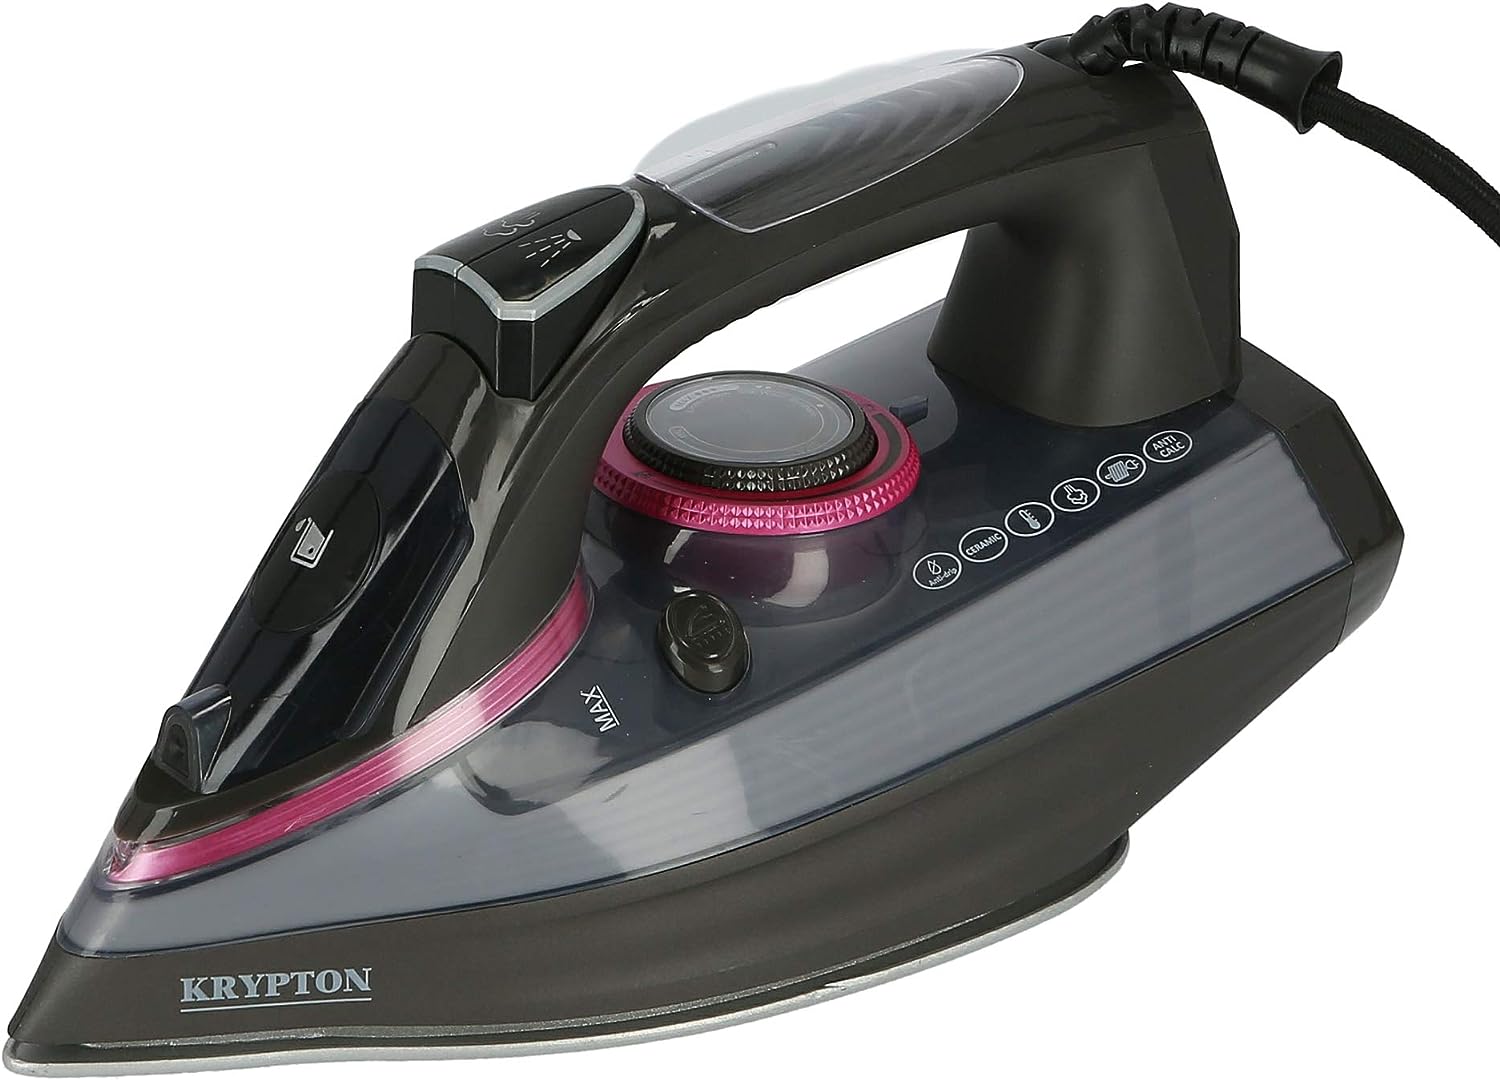 Steam iron with a capacity of 2200 watts in black / purple color from Krypton